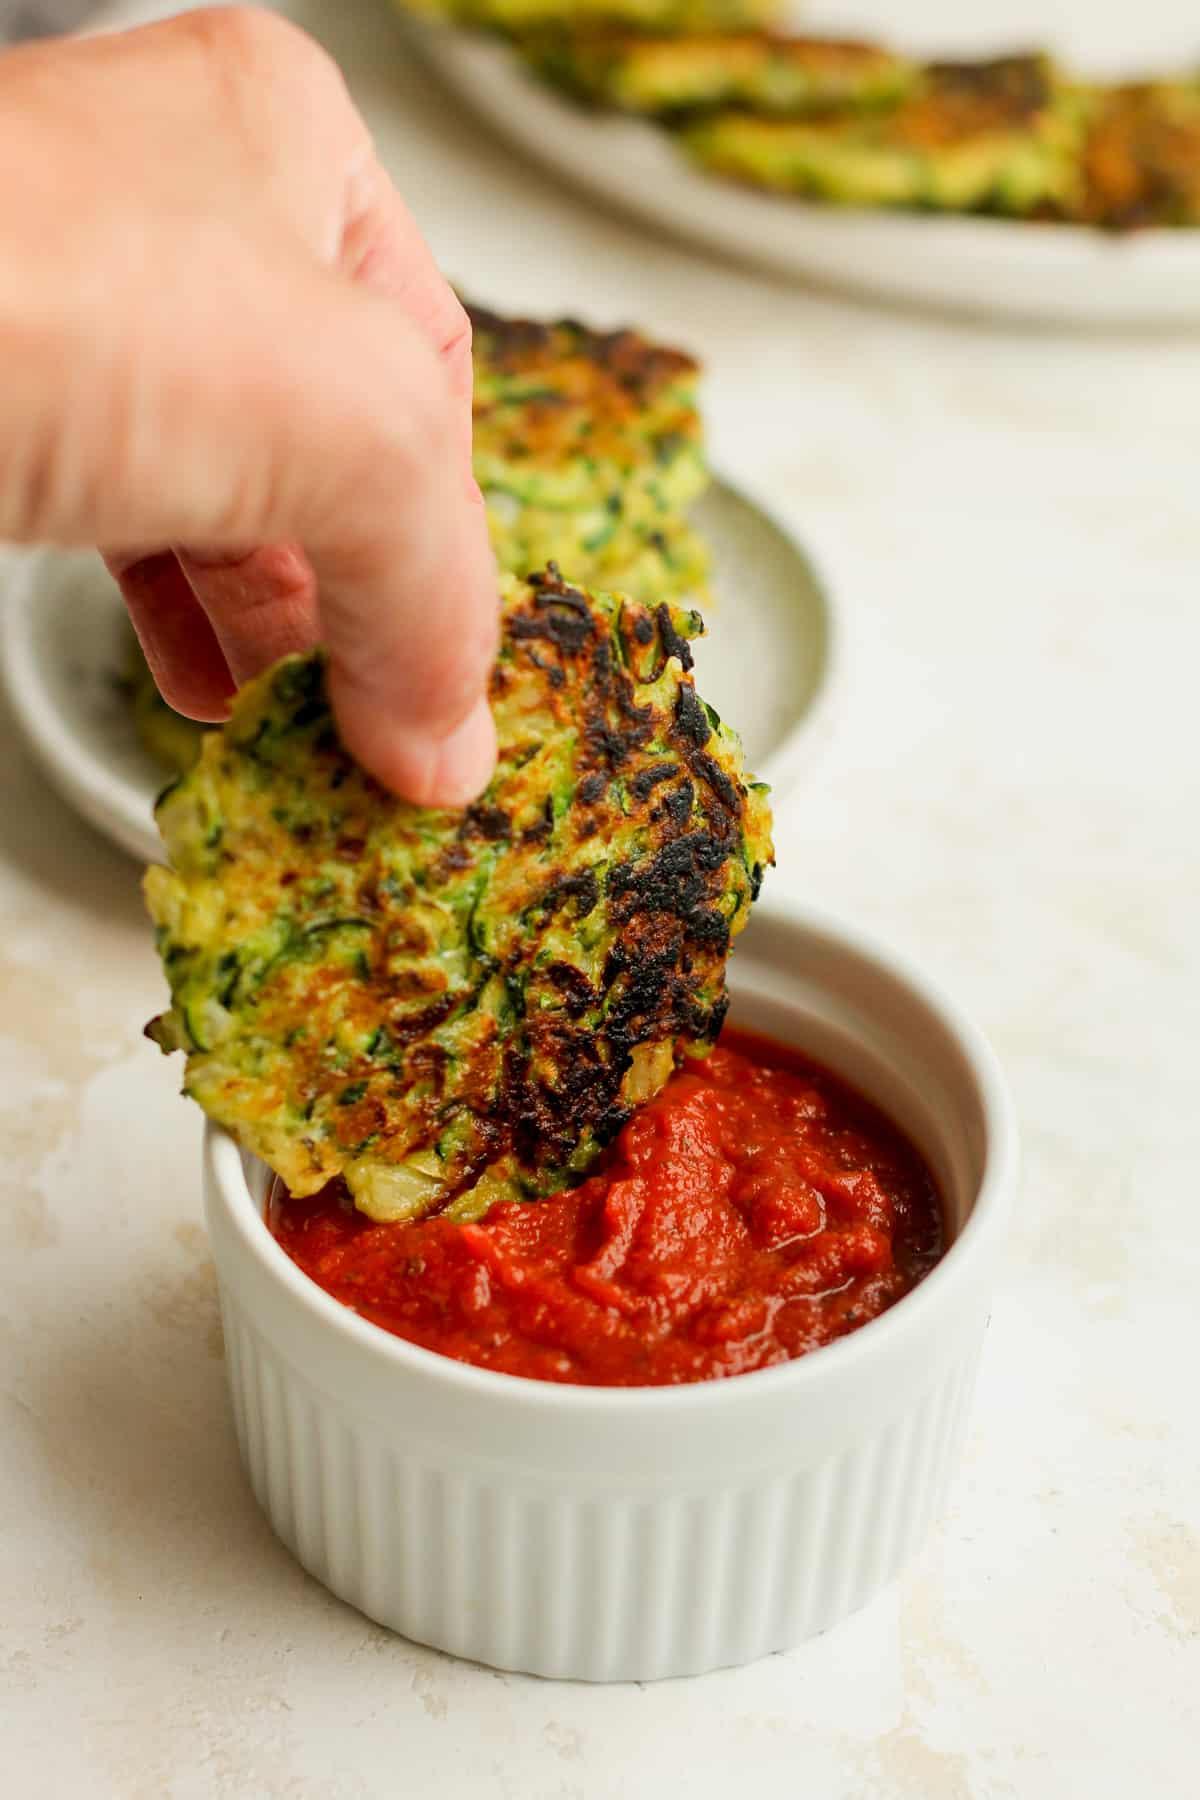 My hand dipping an Italian zucchini fritter in a bowl of sauce.